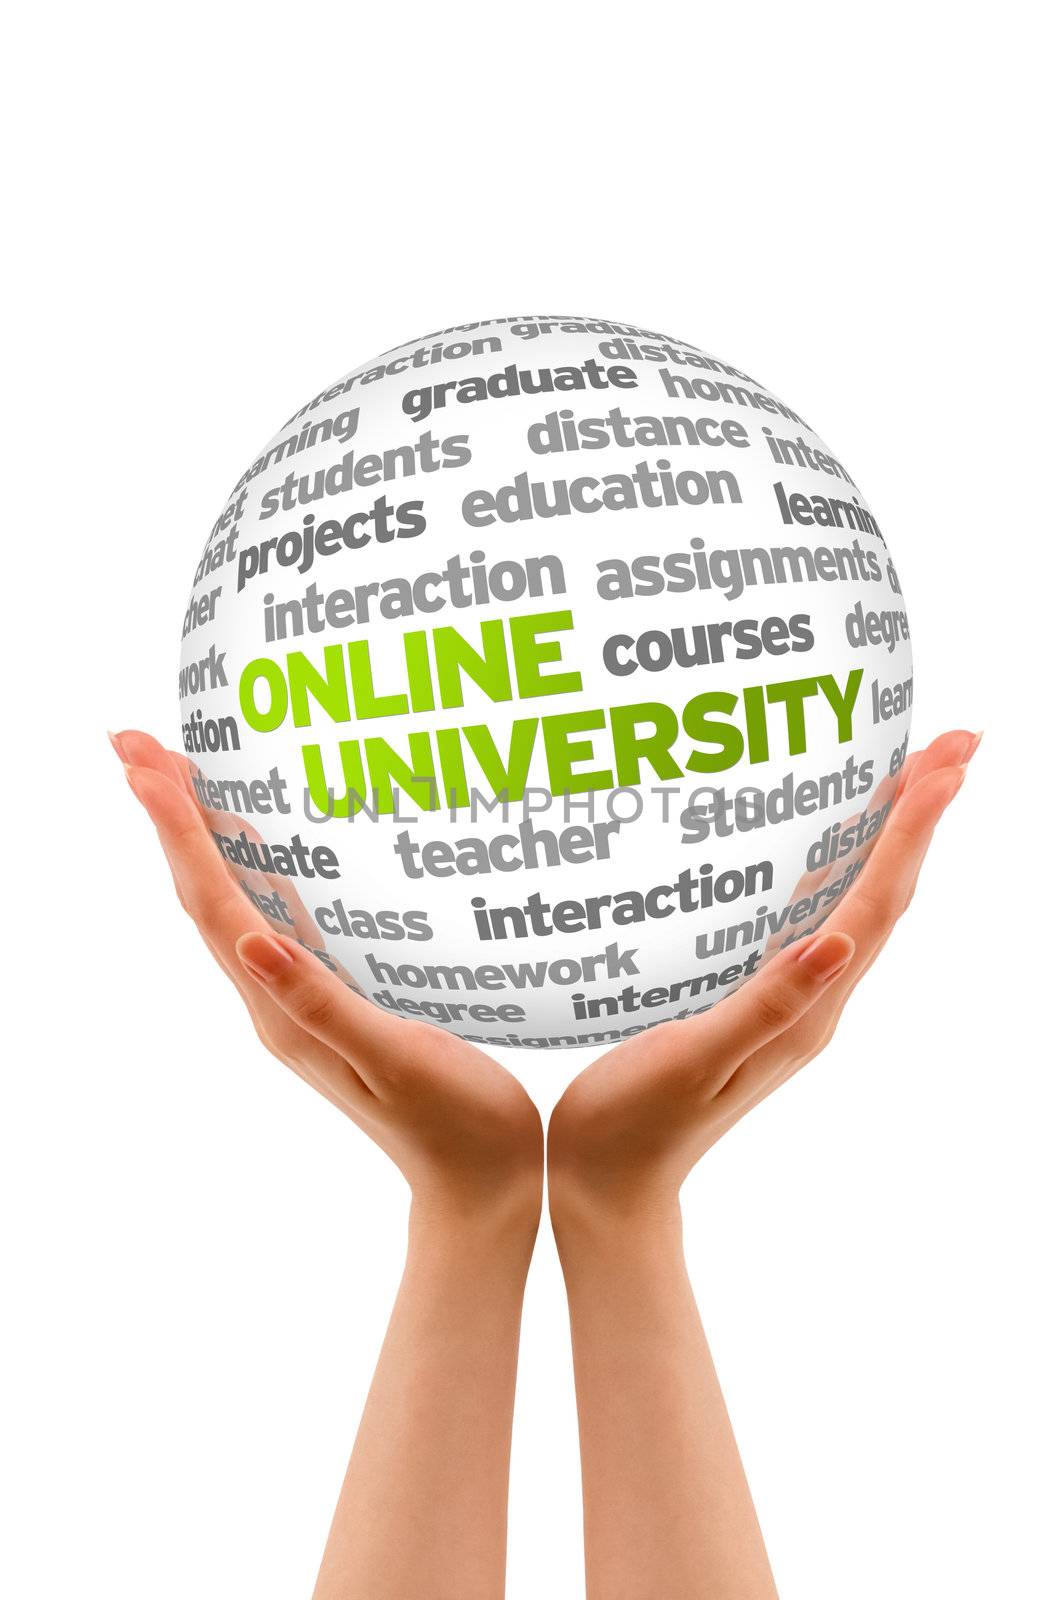 Hands holding a Online University Word Sphere sign on white background.